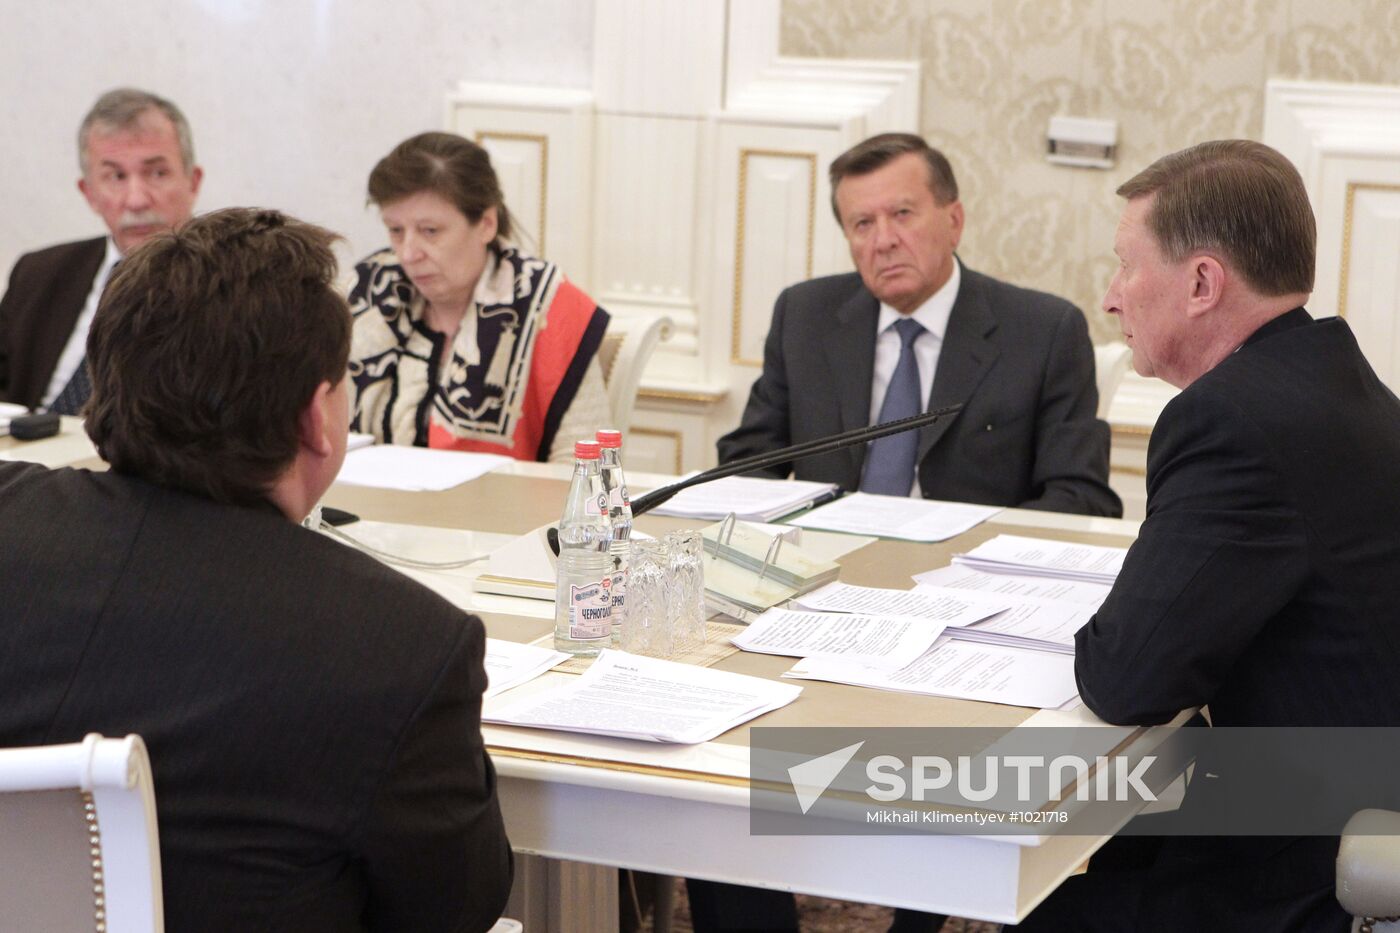 Sergei Ivanov chairs meeting of the Presidential Council